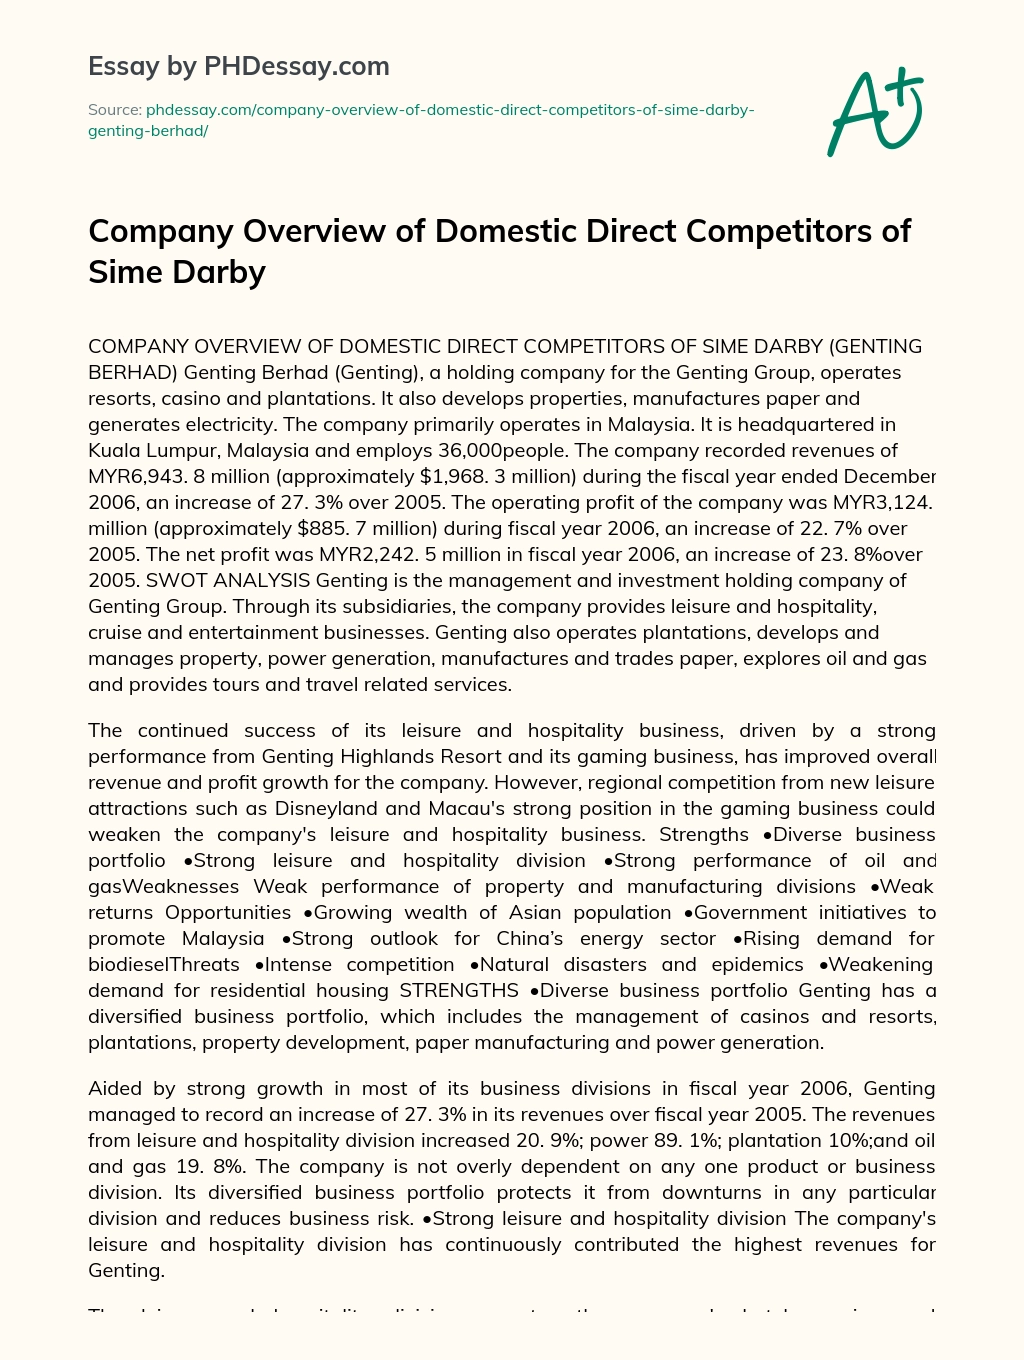 Company Overview of Domestic Direct Competitors of Sime Darby essay